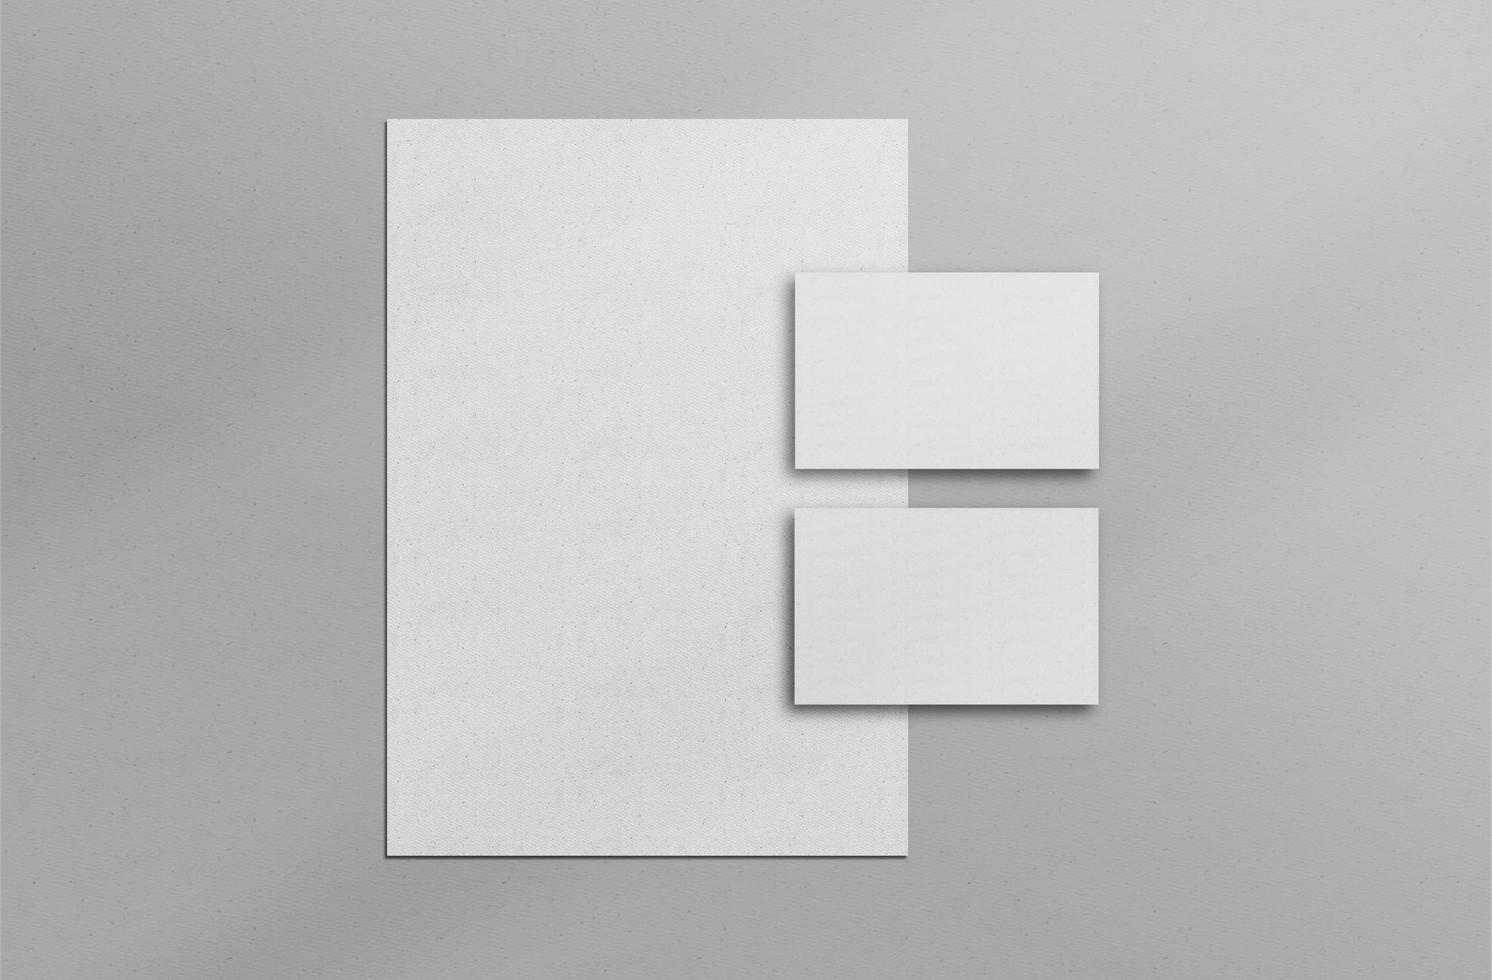 Realistic top view cover and opened portrait A4 or A5 magazine or brochure booklet for stationery and branding. Mockup template isolated light grey background and leaf shadow overlay. 3D rendering. photo